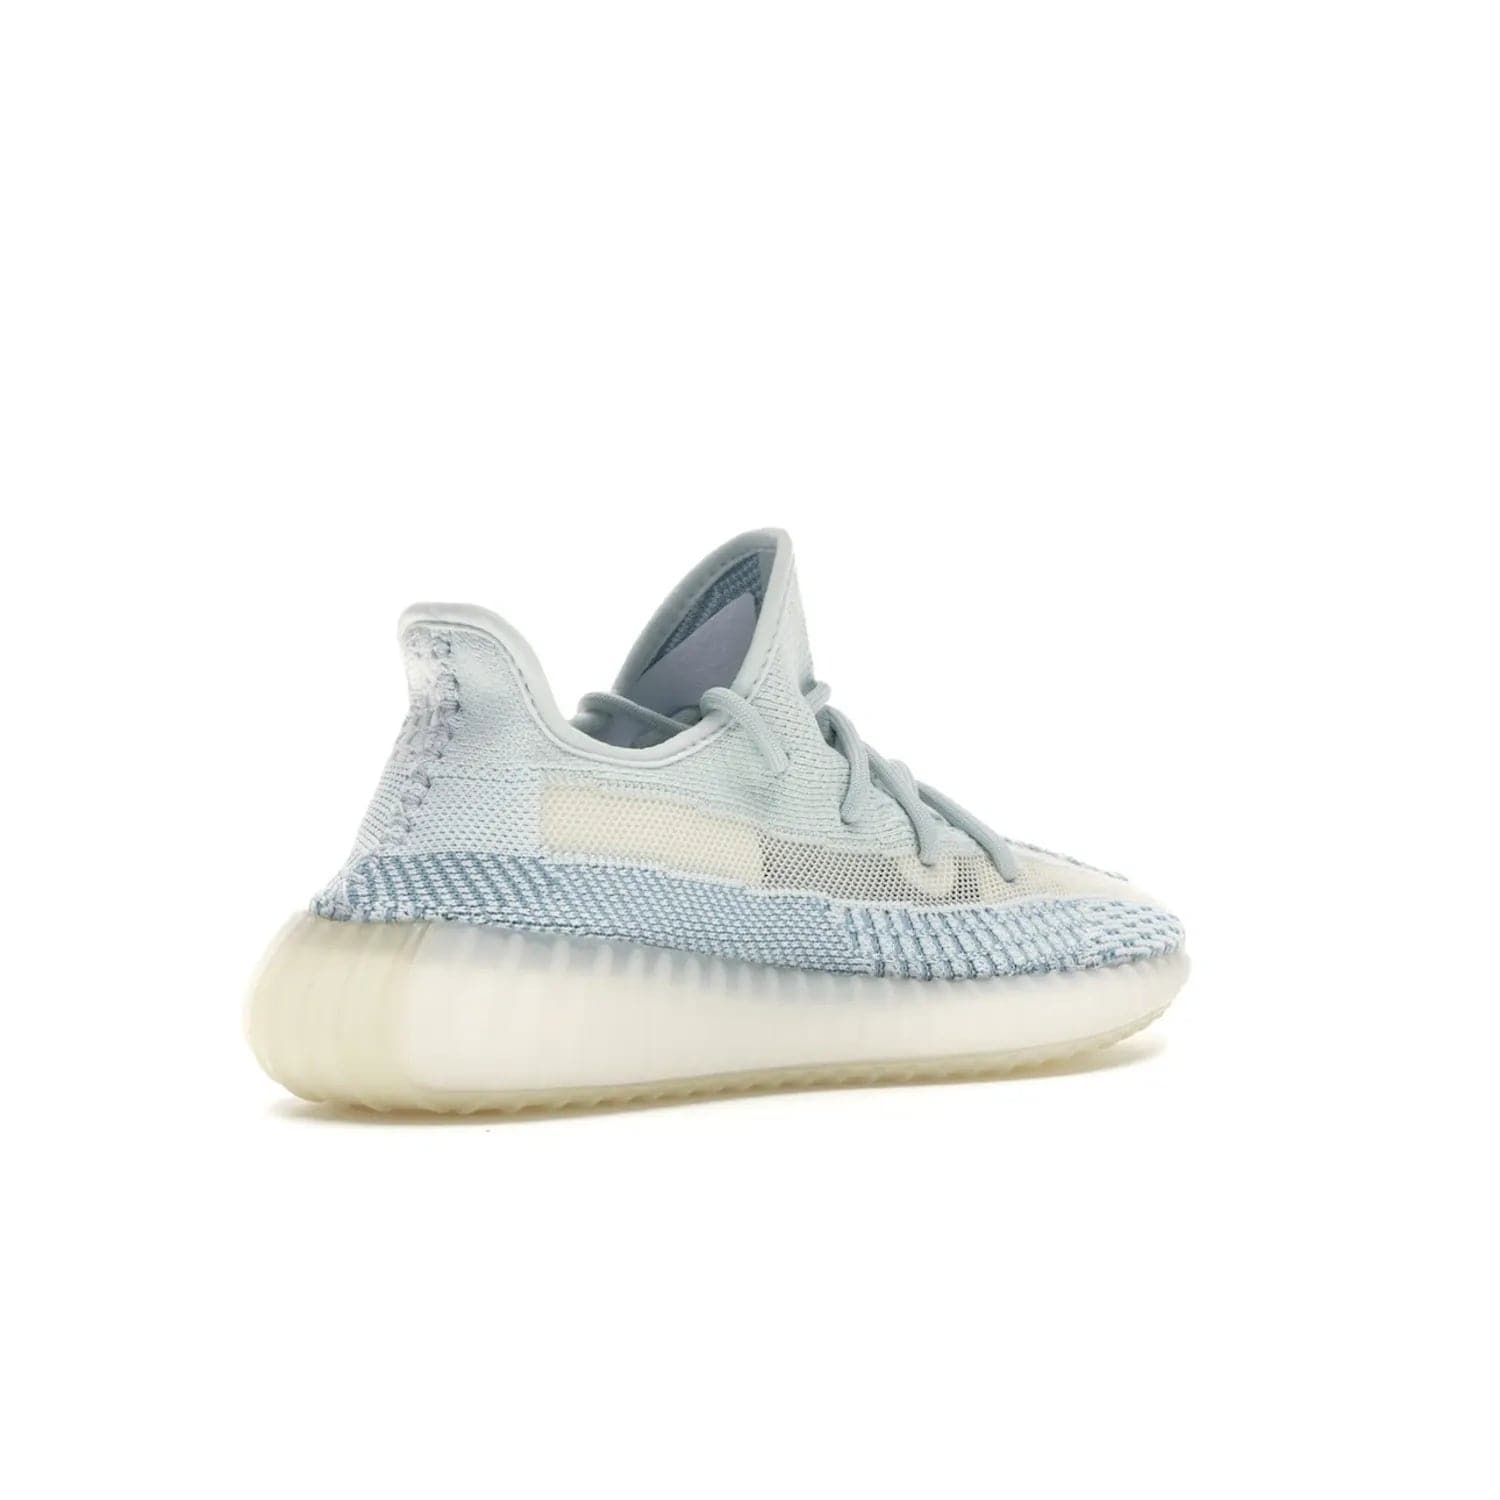 adidas Yeezy Boost 350 V2 Cloud White (Non-Reflective) - Image 33 - Only at www.BallersClubKickz.com - Uniquely designed adidas Yeezy Boost 350 V2 Cloud White (Non-Reflective) with a Primeknit upper in shades of cream and blue with a contrasting hard sole. A fashion-forward sneaker with a transparent strip and blue-and-white patterns.